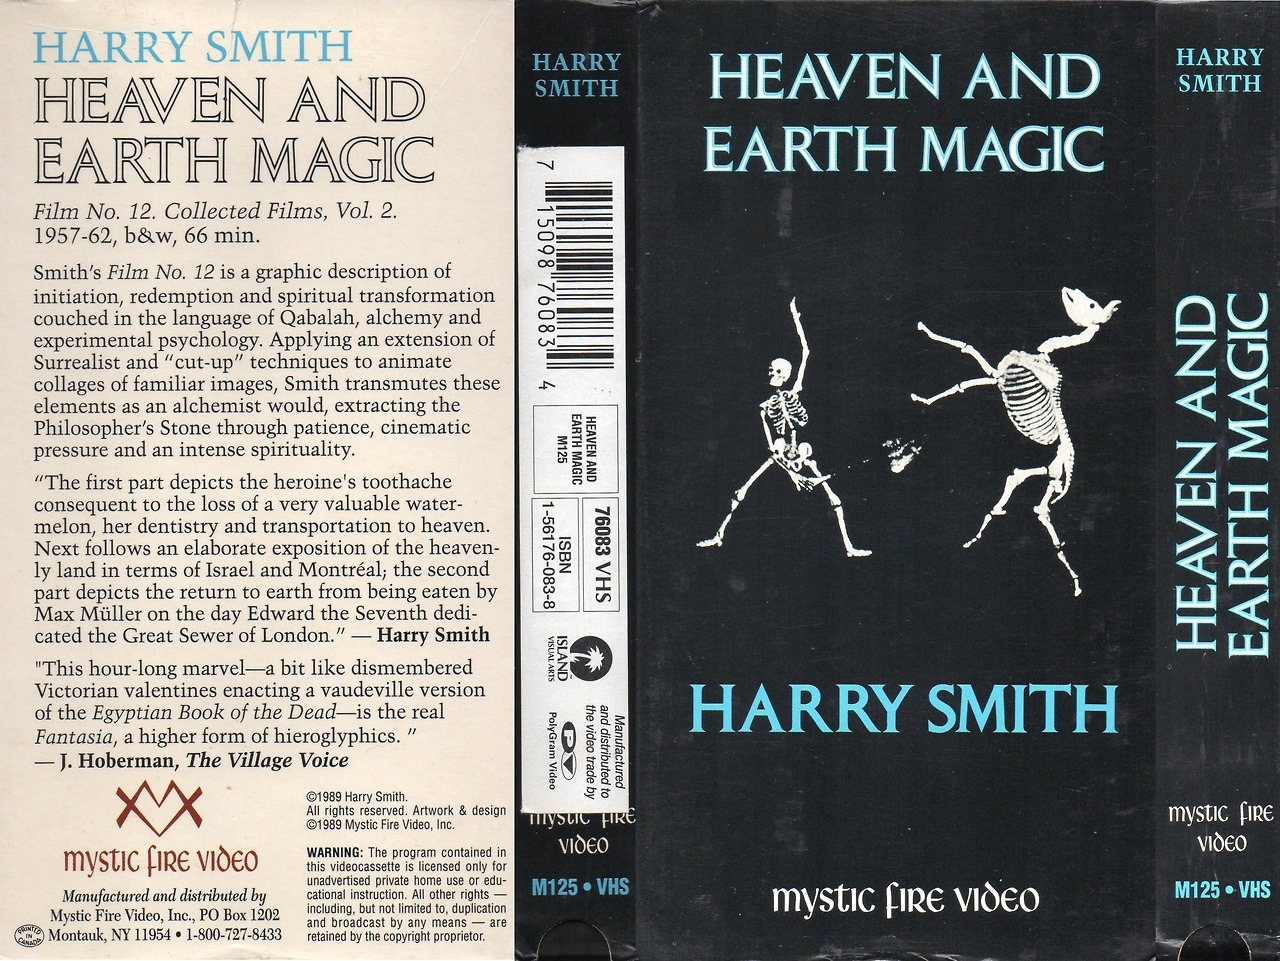 Heaven and Earth Magic (1957-1962) by HARRY SMITH